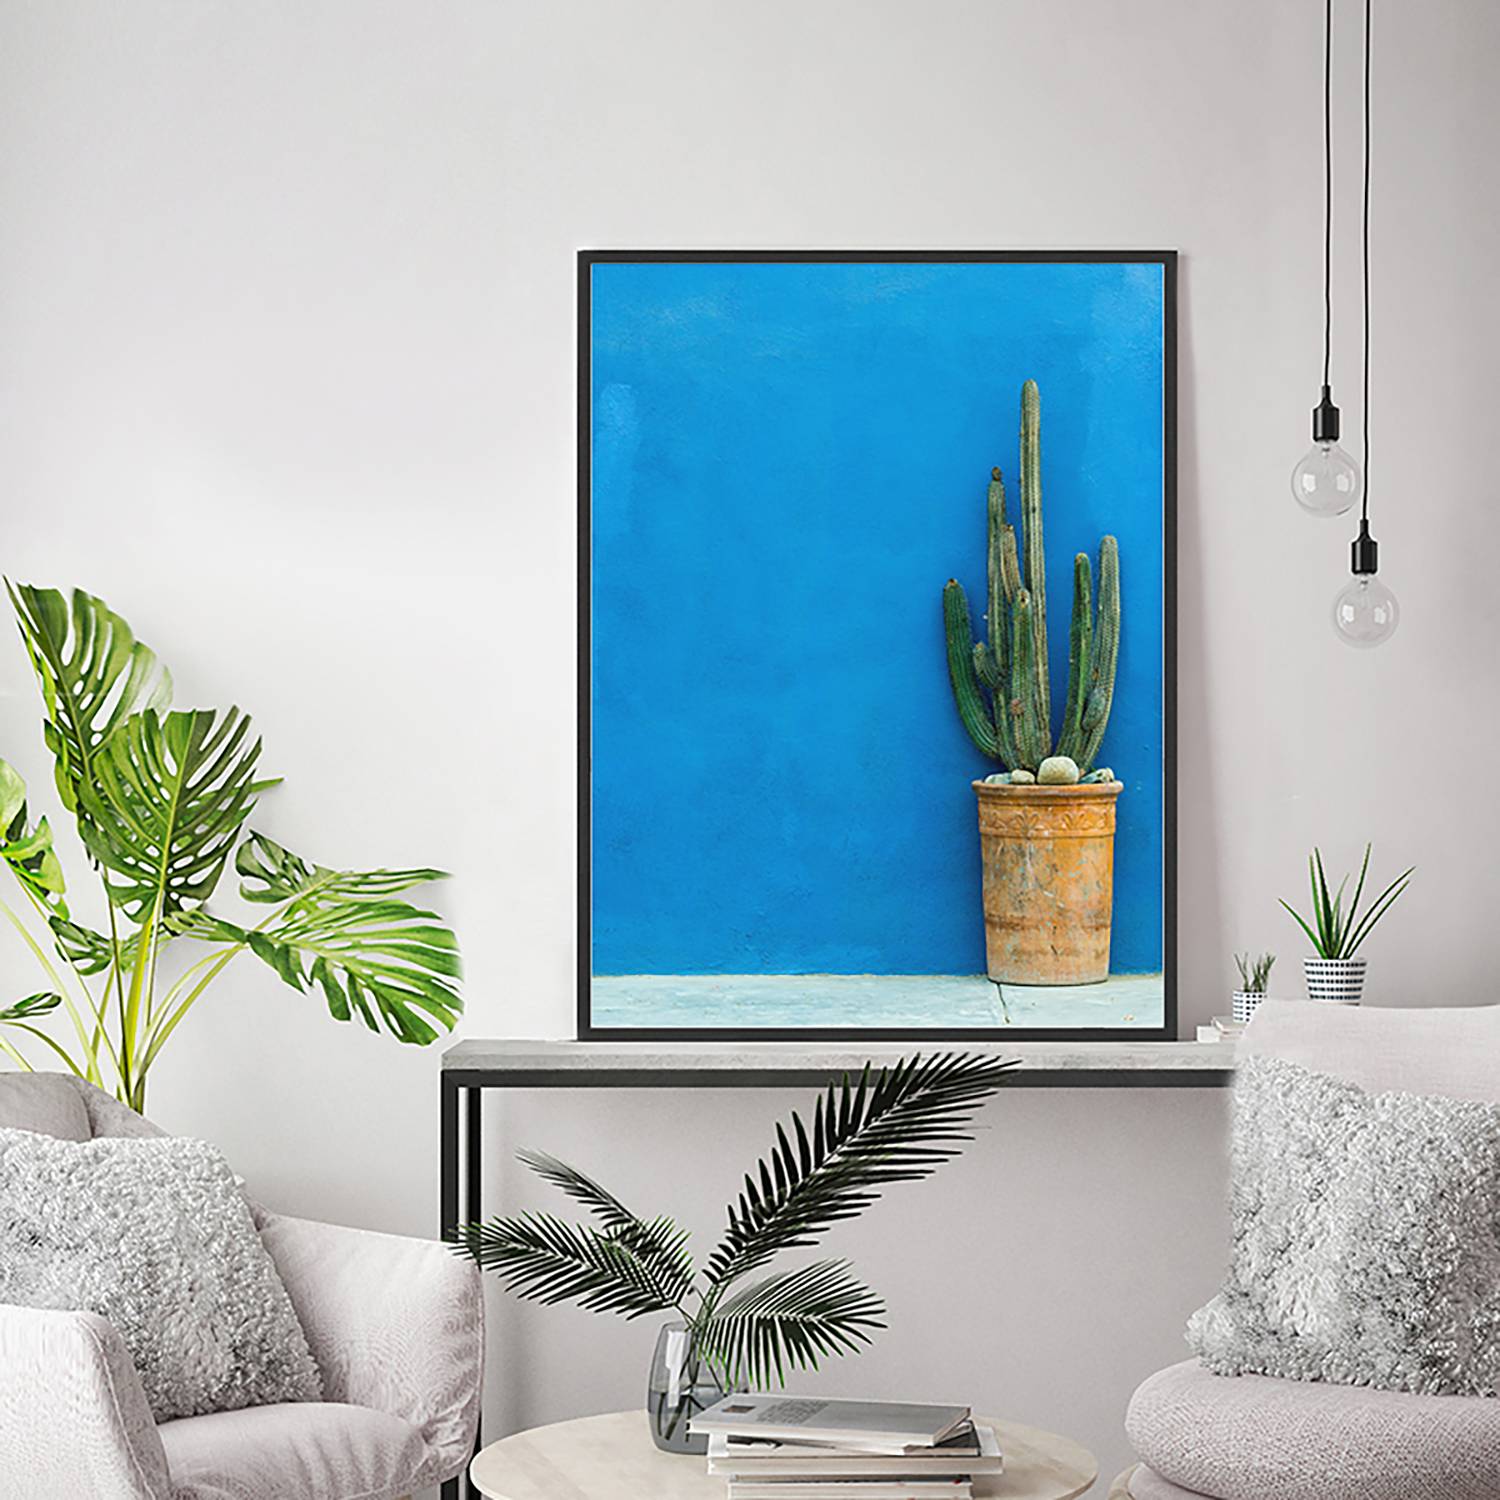 Bild Blue Wall with Cactus von Any Image